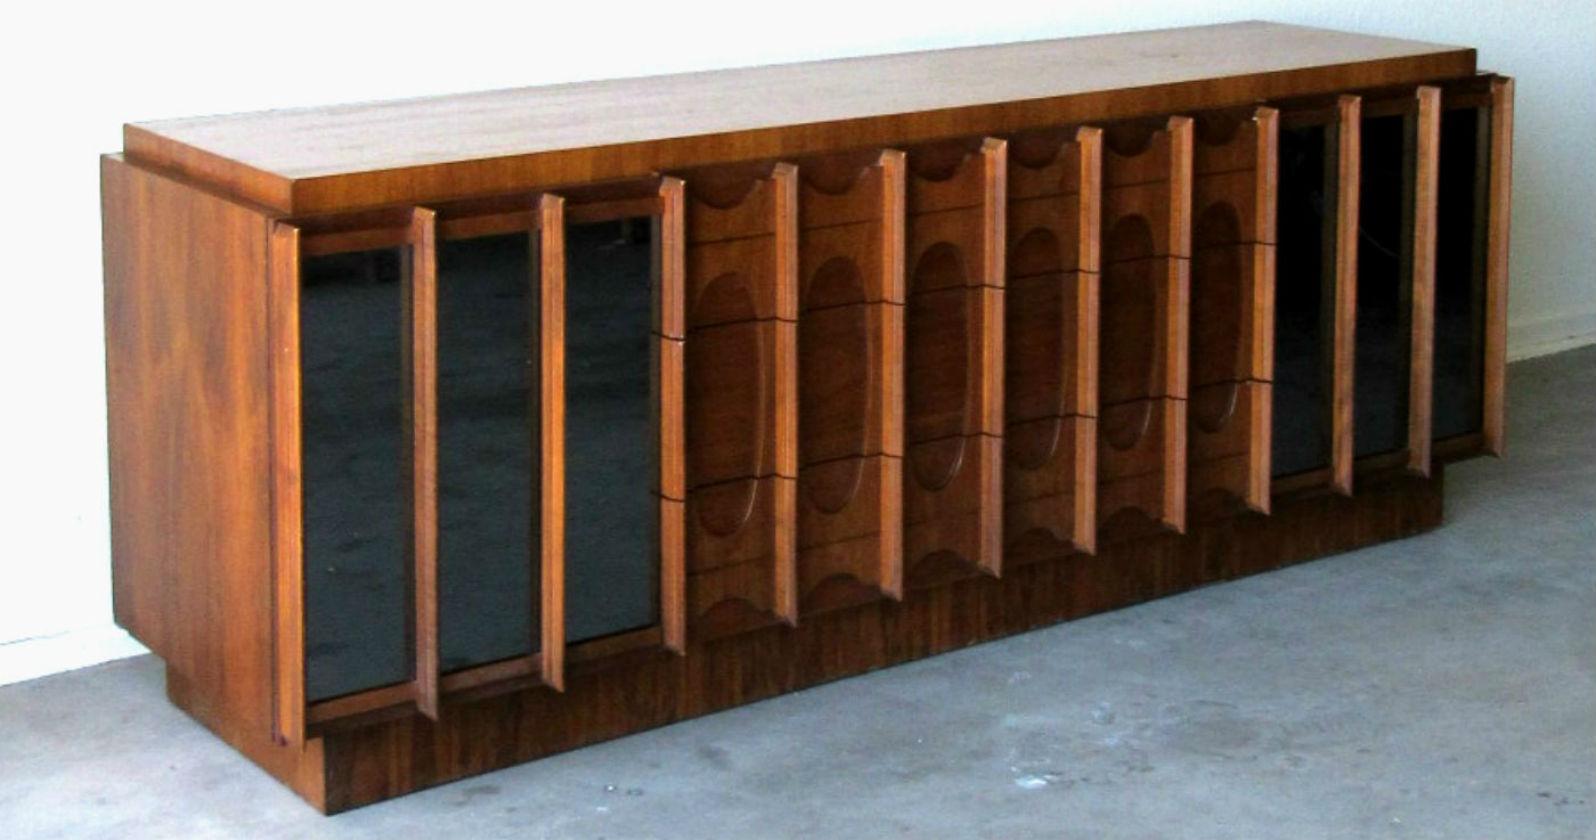 Midcentury Modern Brasilia Style Dresser with Mirrored Front.  Walnut dresser, made in Canada 1960s   In the popular Brasilia style referencing the work of Oscar Niemeyer.   Dresser features nine drawers and has generous storage.  